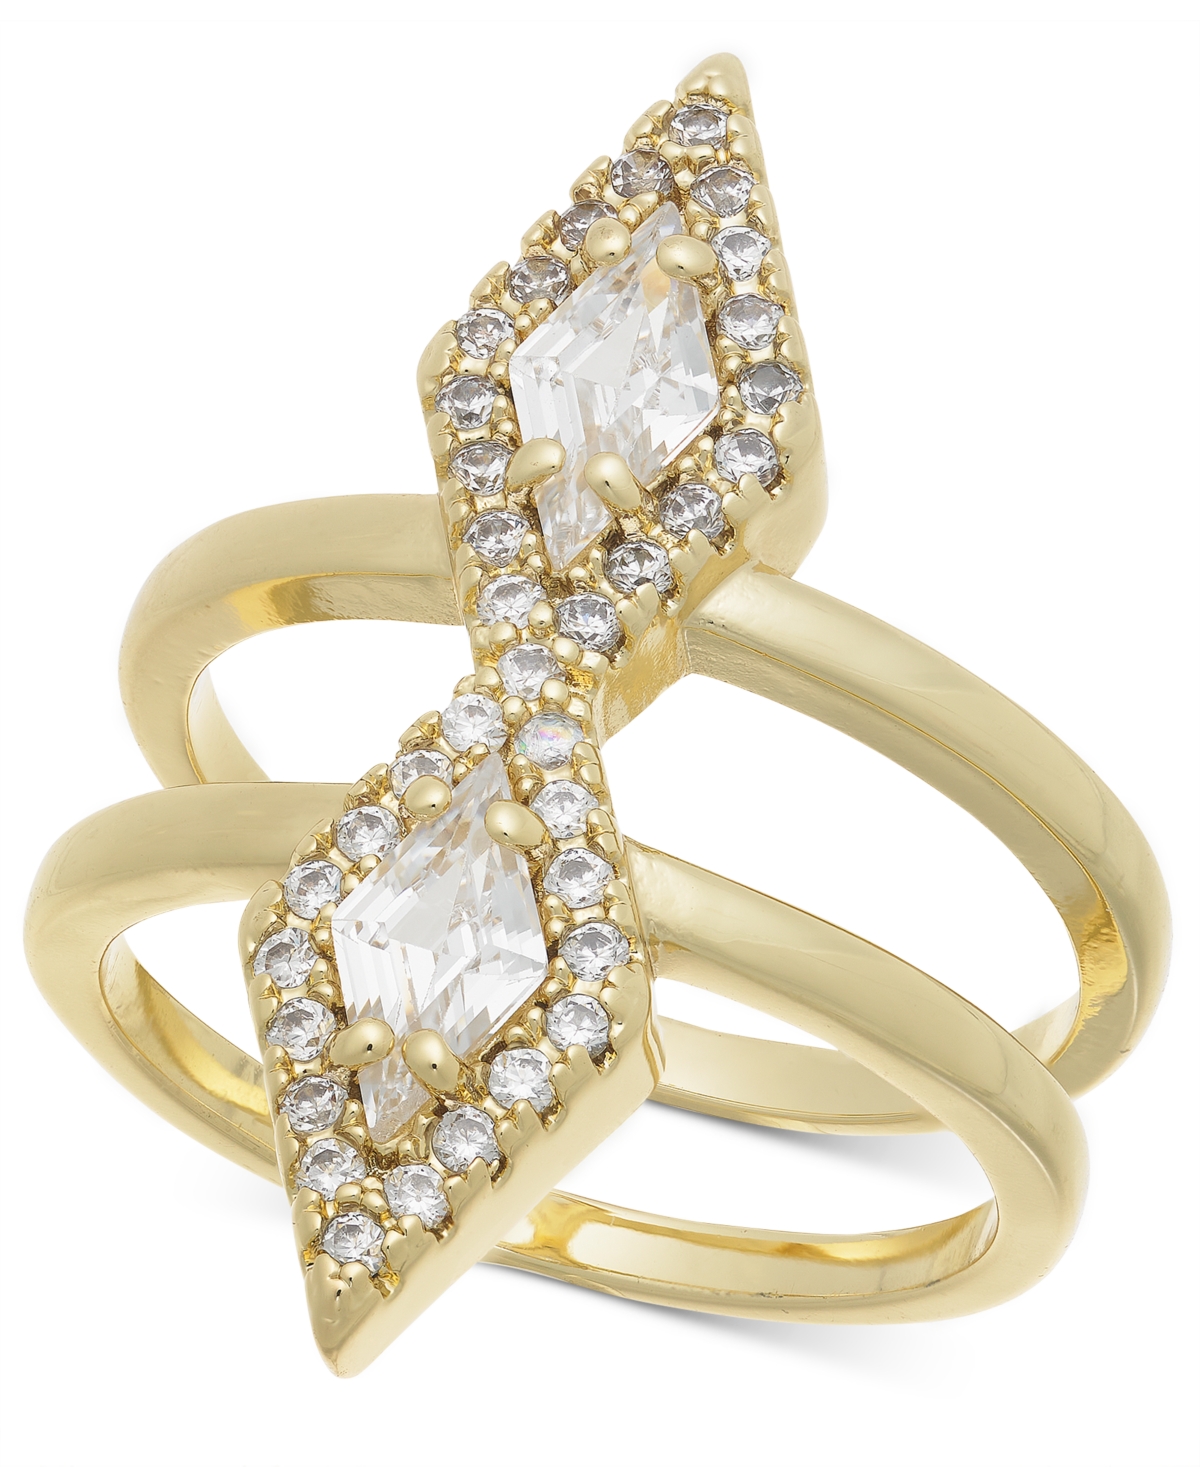 Gold-Tone Cubic Zirconia Triangle Double Row Ring, Created for Macy's - Gold